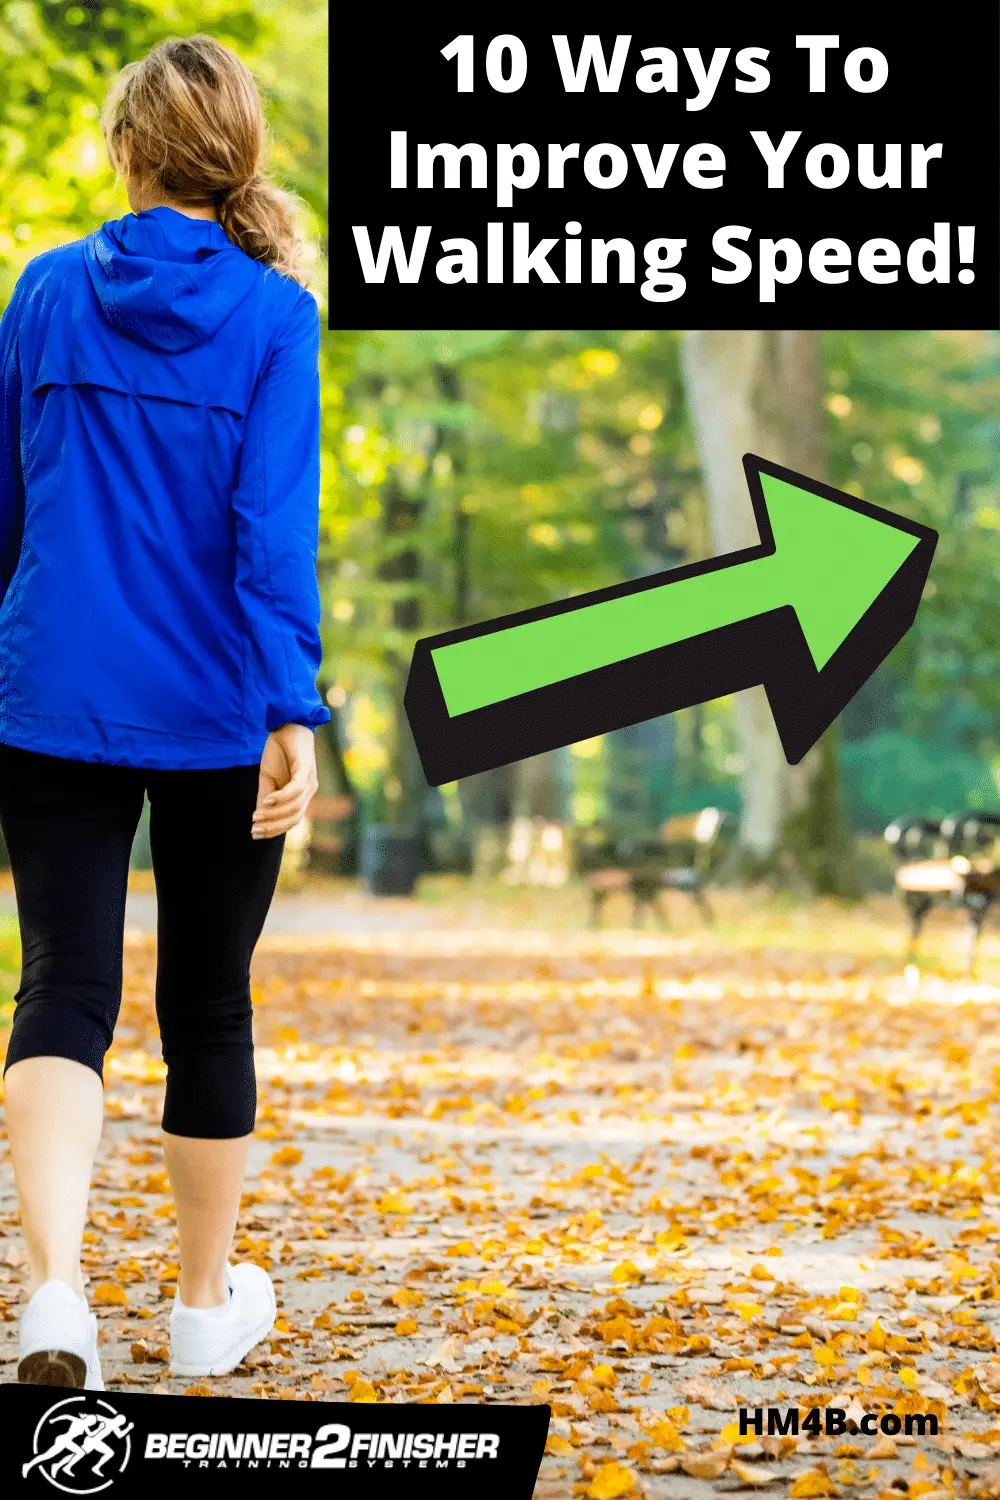 10 Ways To Improve Your Walking Speed